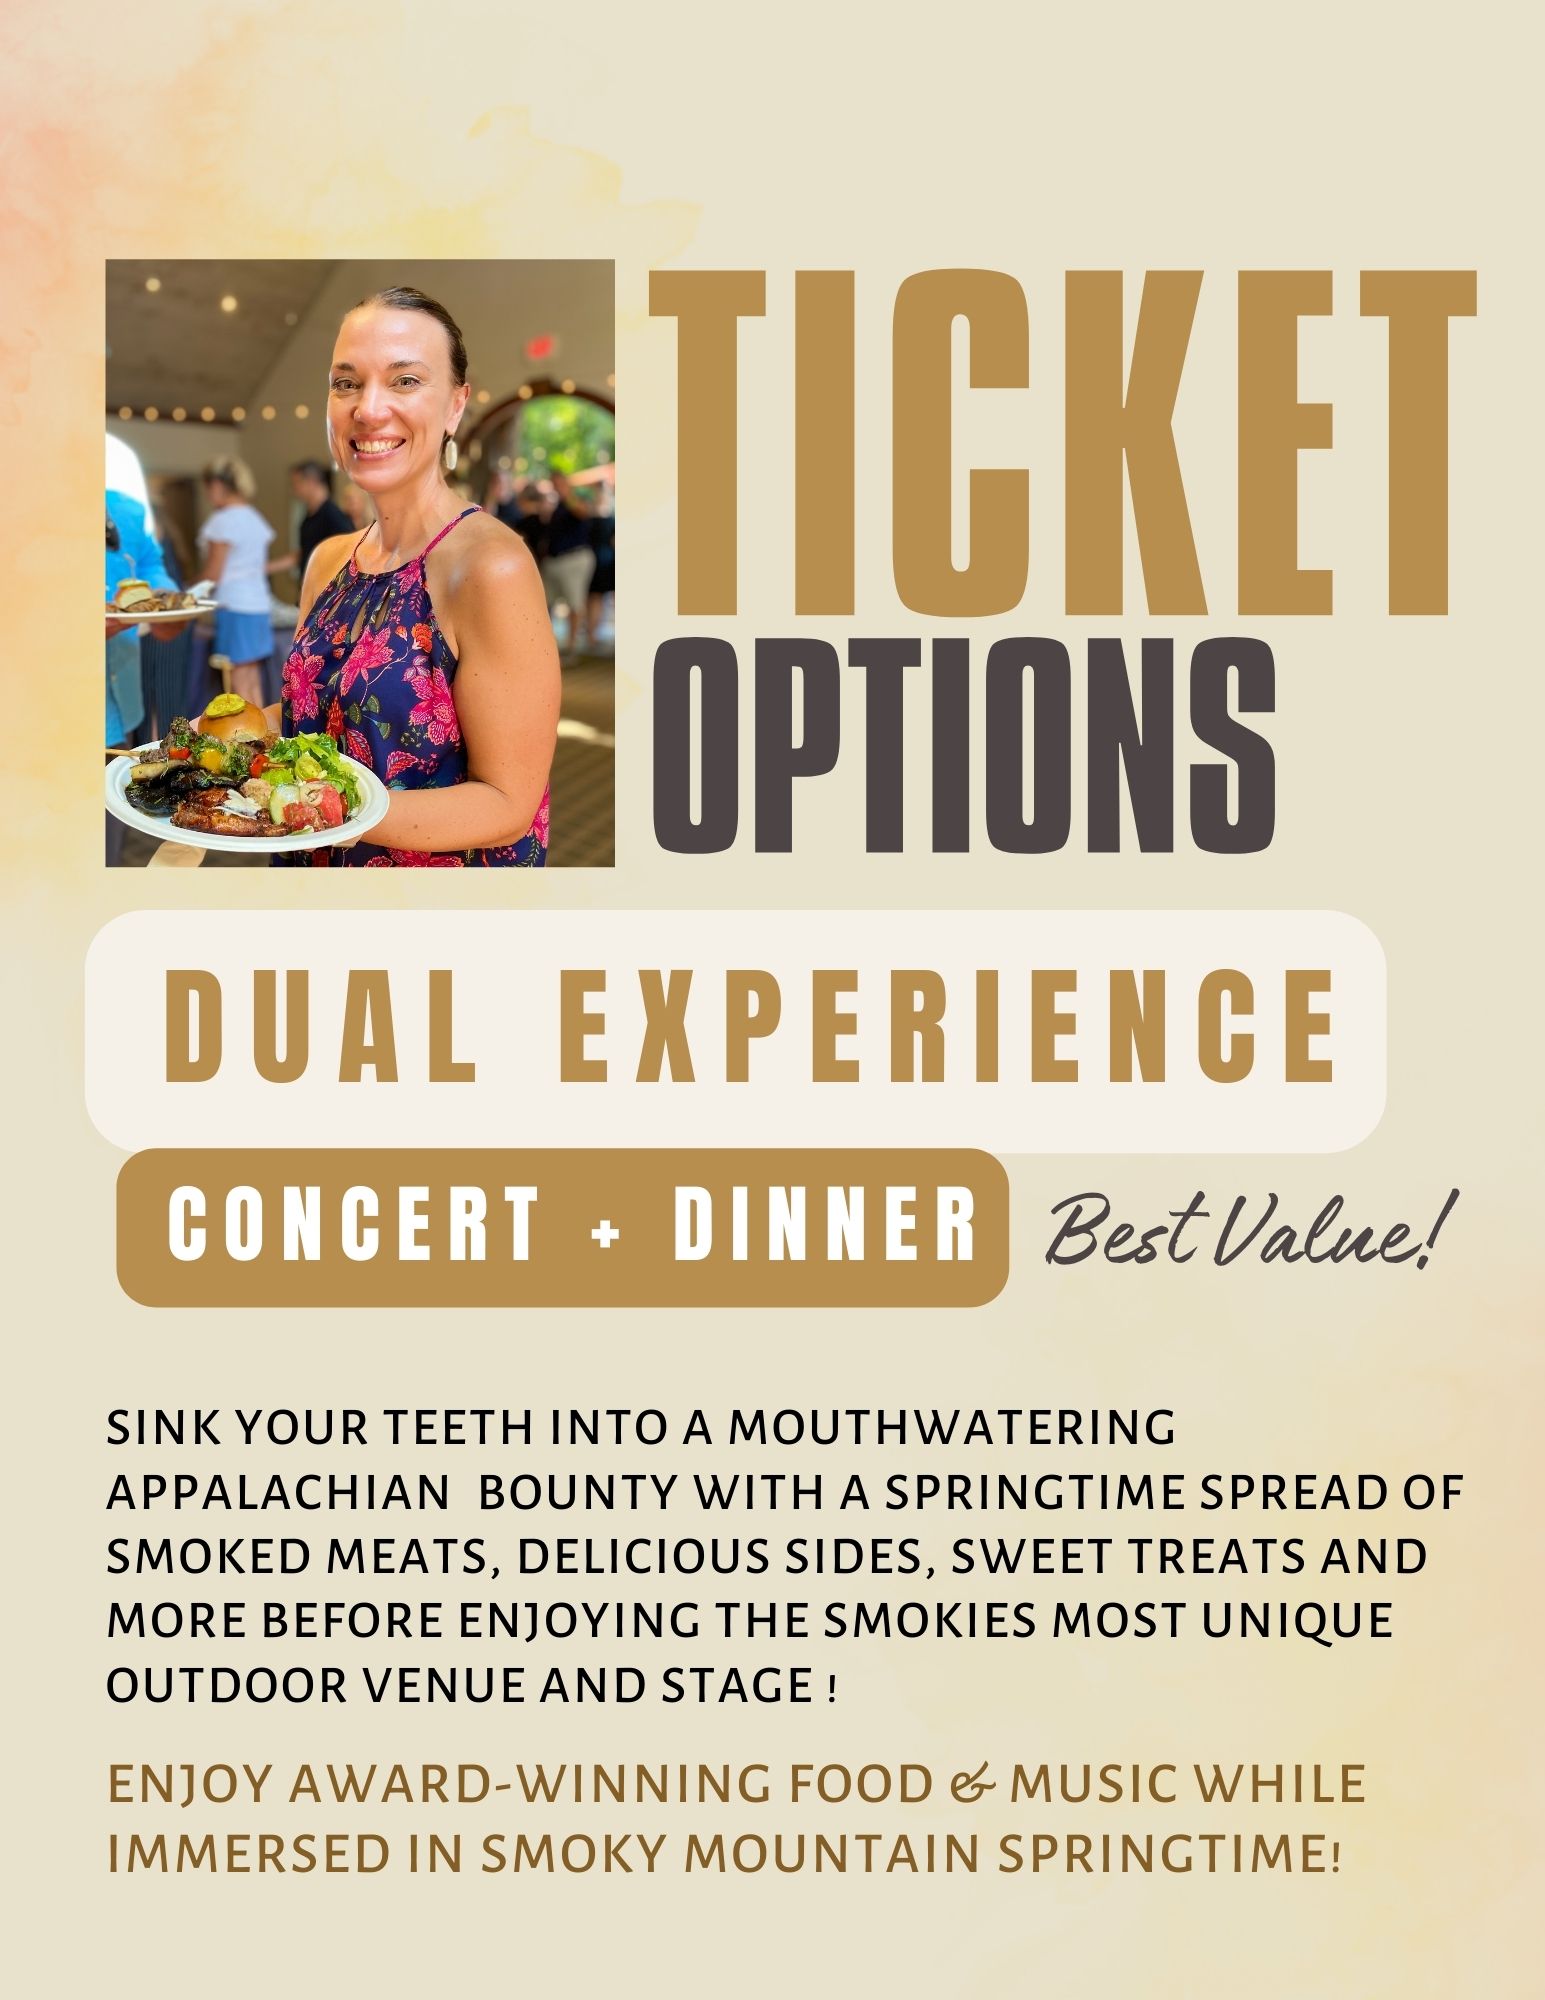 Dual Experience Ticket Options